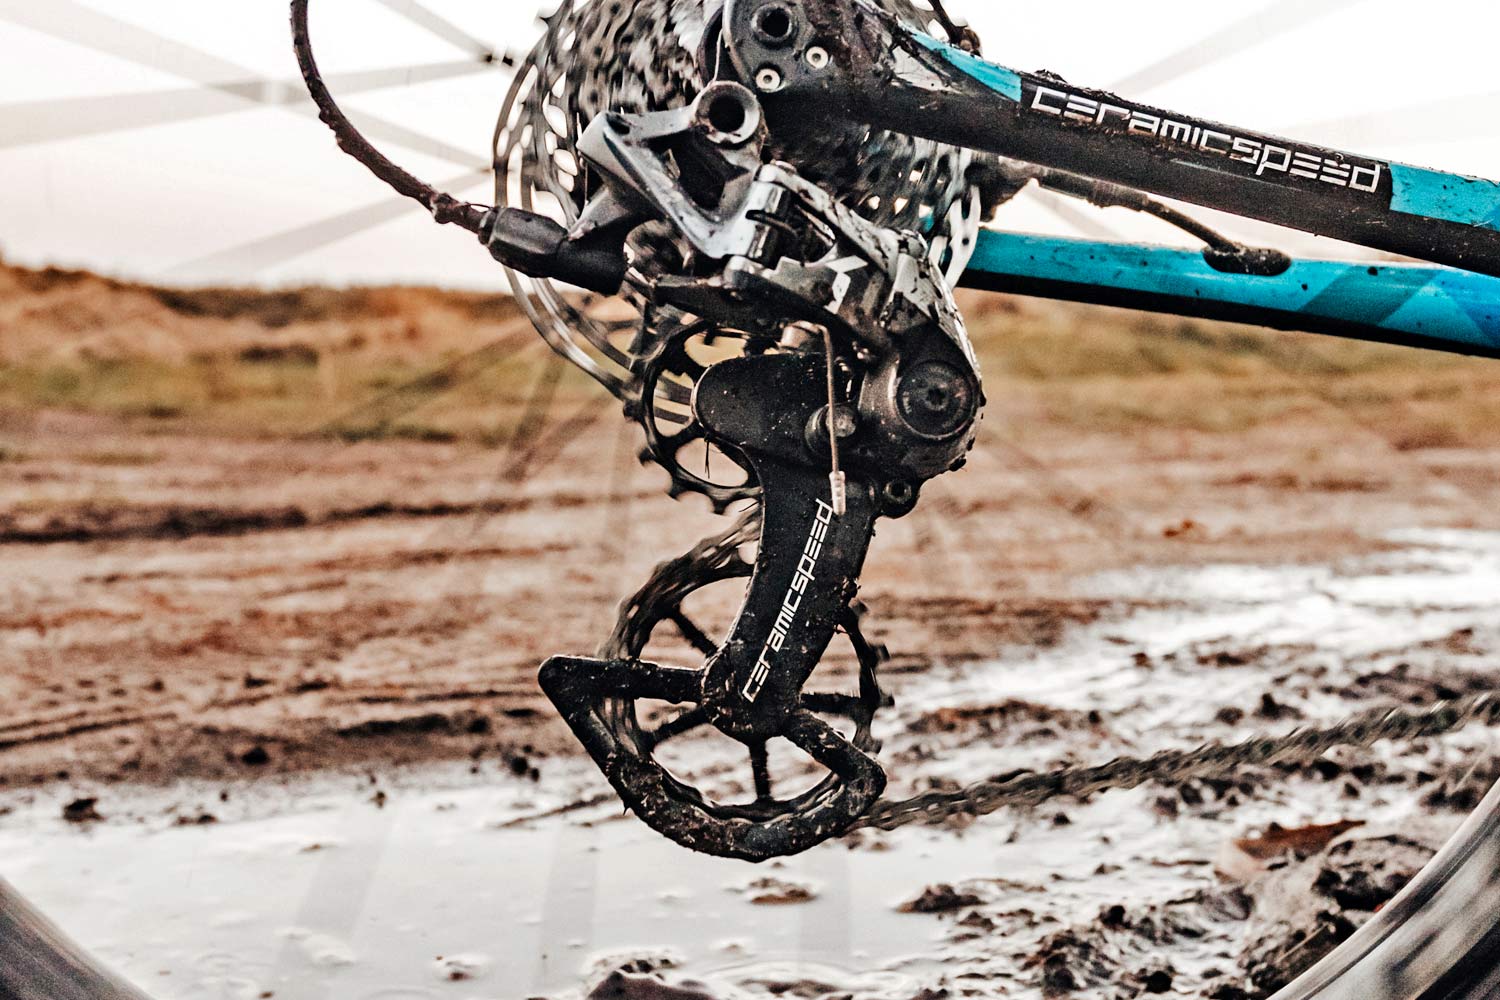 Riding dirty on CeramicSpeed OSPW X off-road w/ massive gravel & CX pulleys